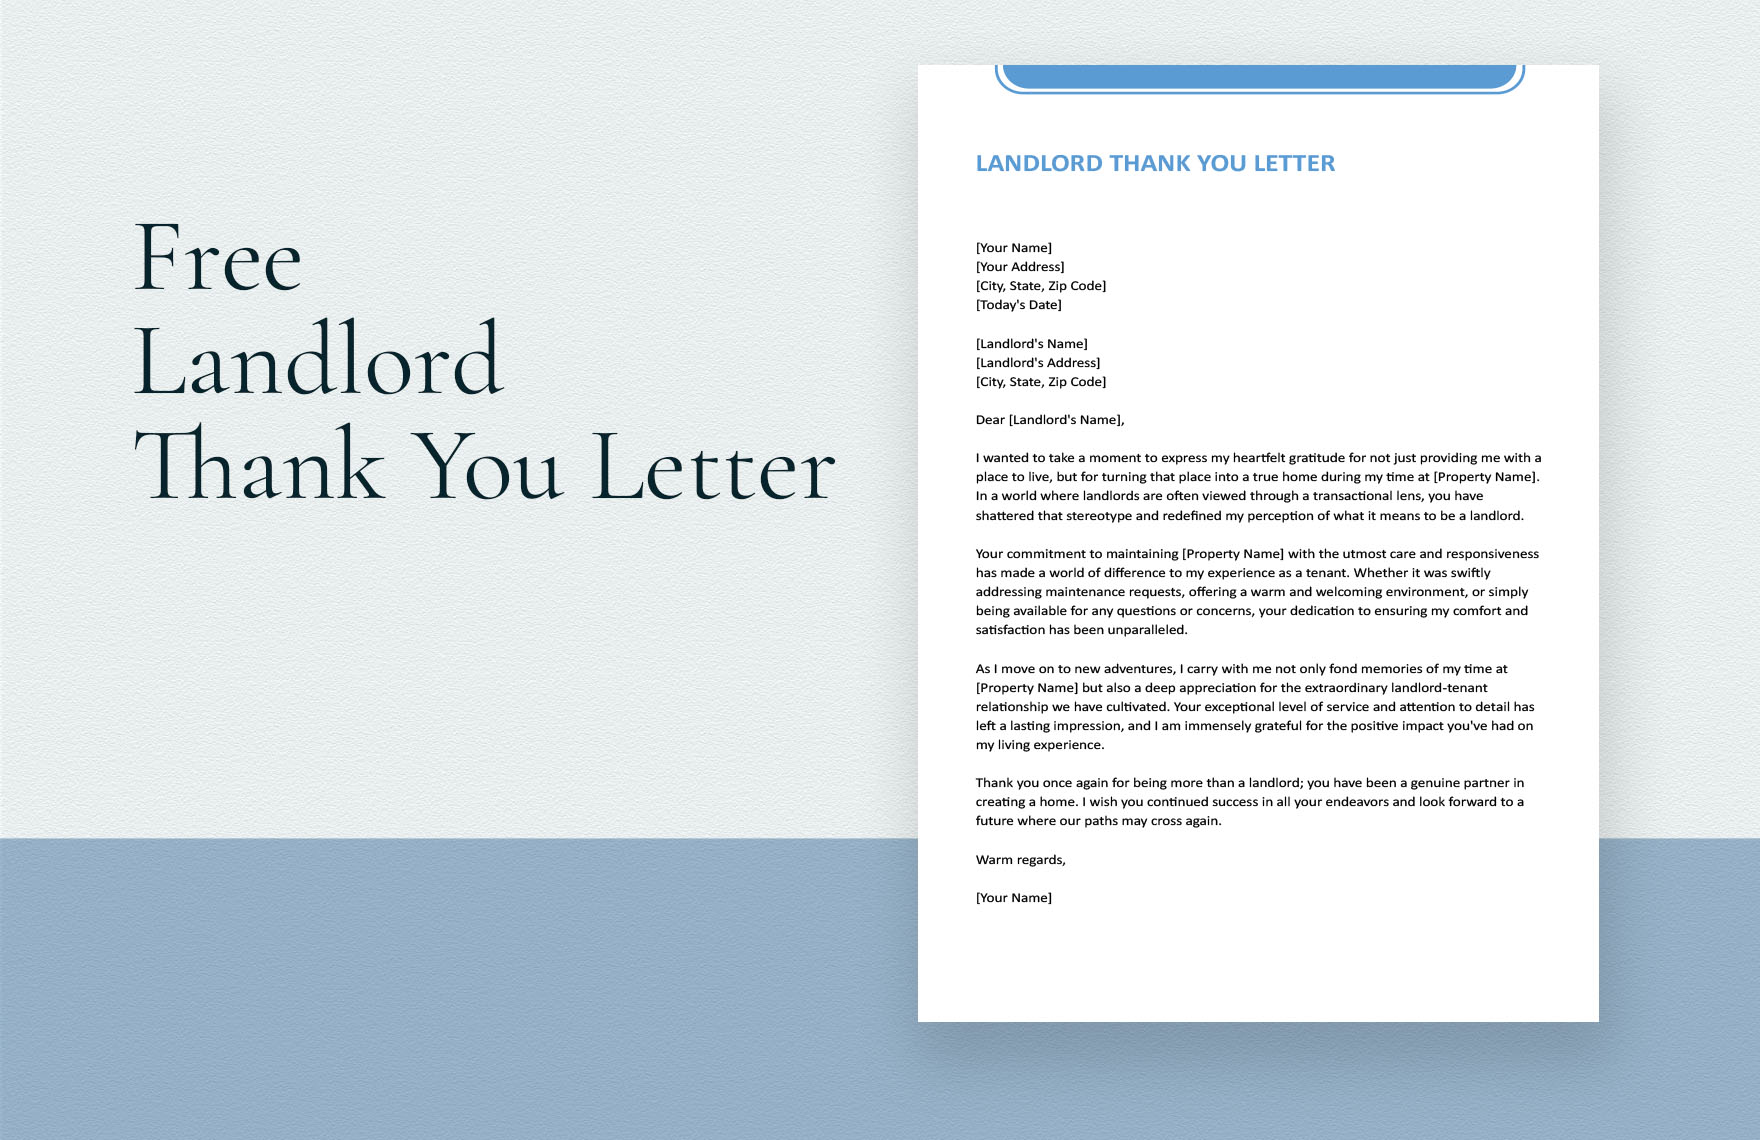 Landlord Thank You Letter